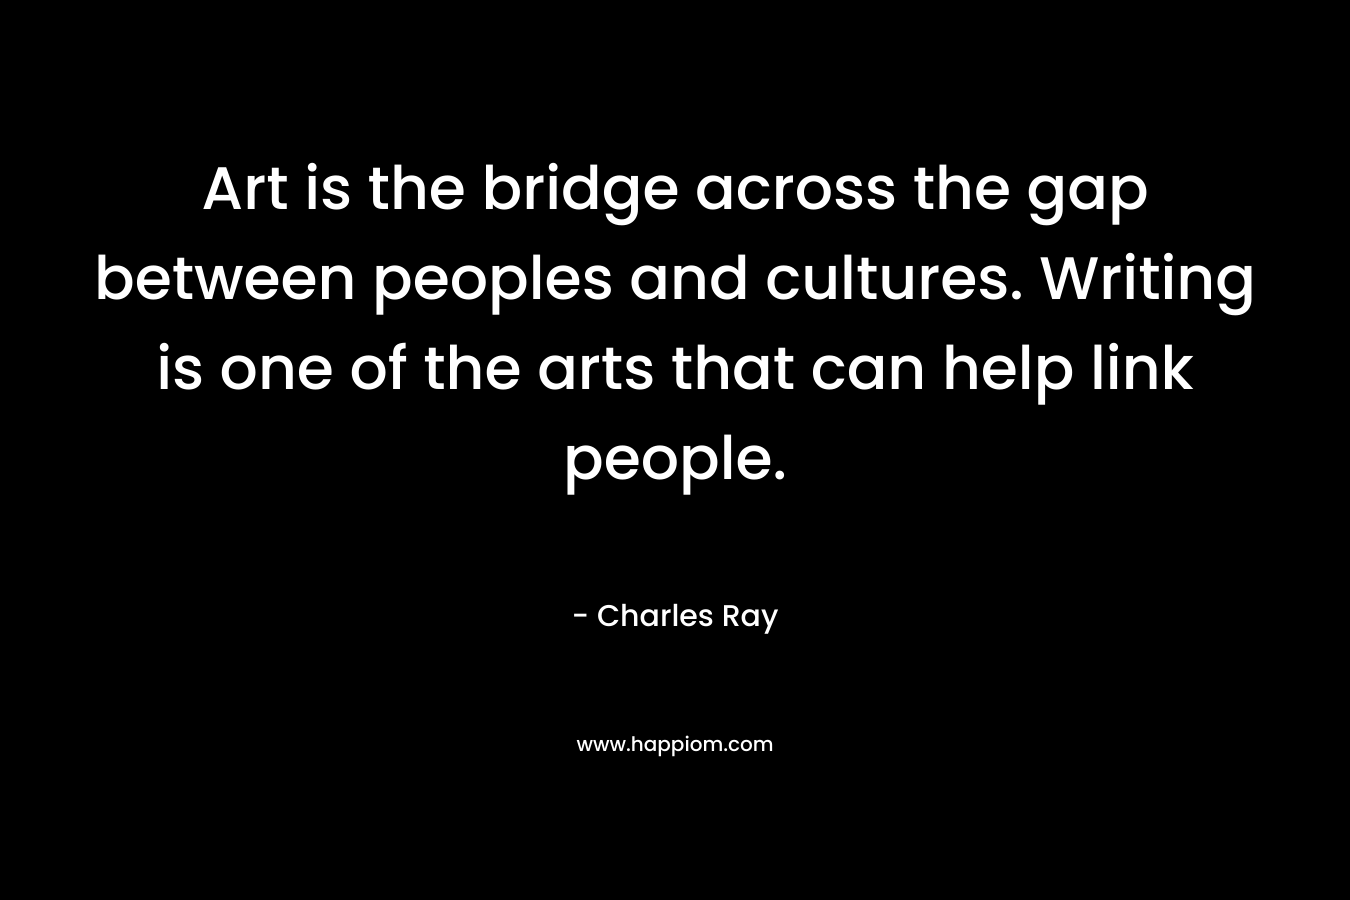 Art is the bridge across the gap between peoples and cultures. Writing is one of the arts that can help link people. – Charles Ray